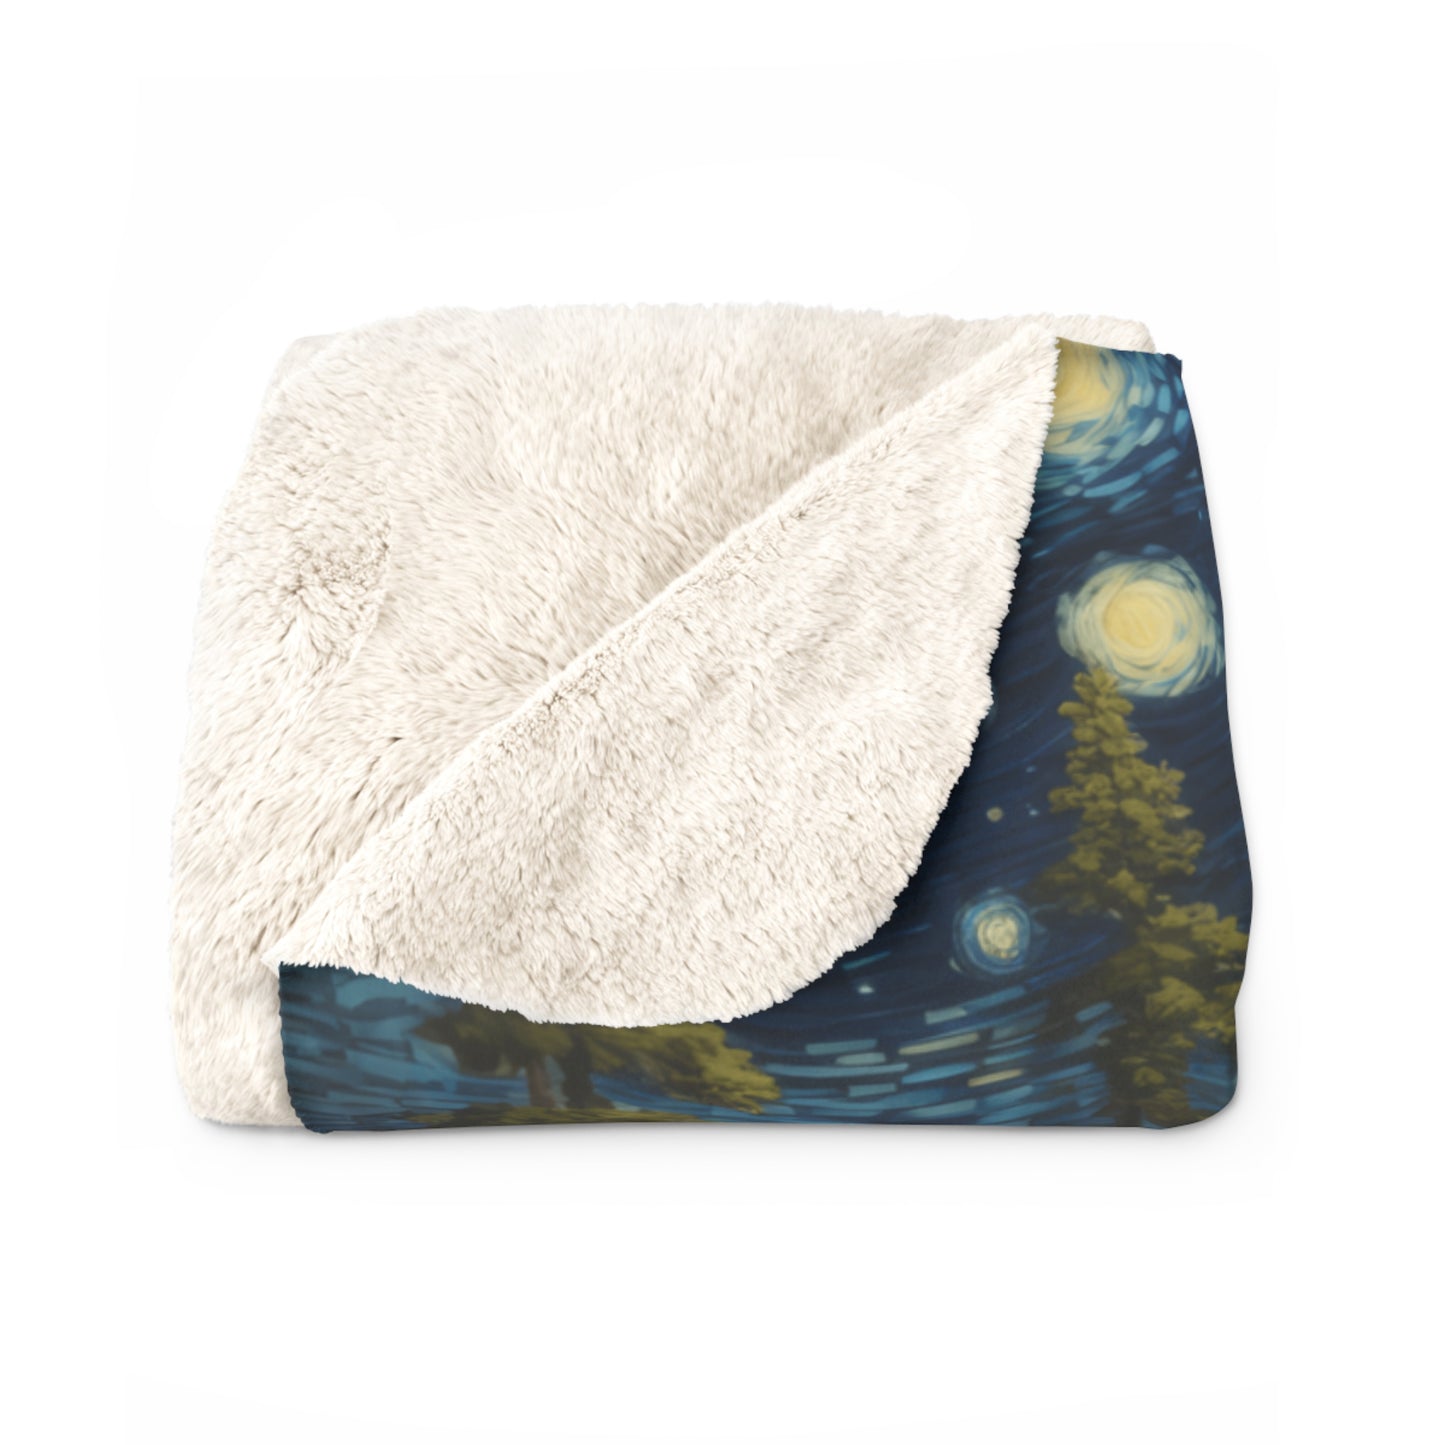 Voyageurs National Park Sherpa Blanket - The Starry Night